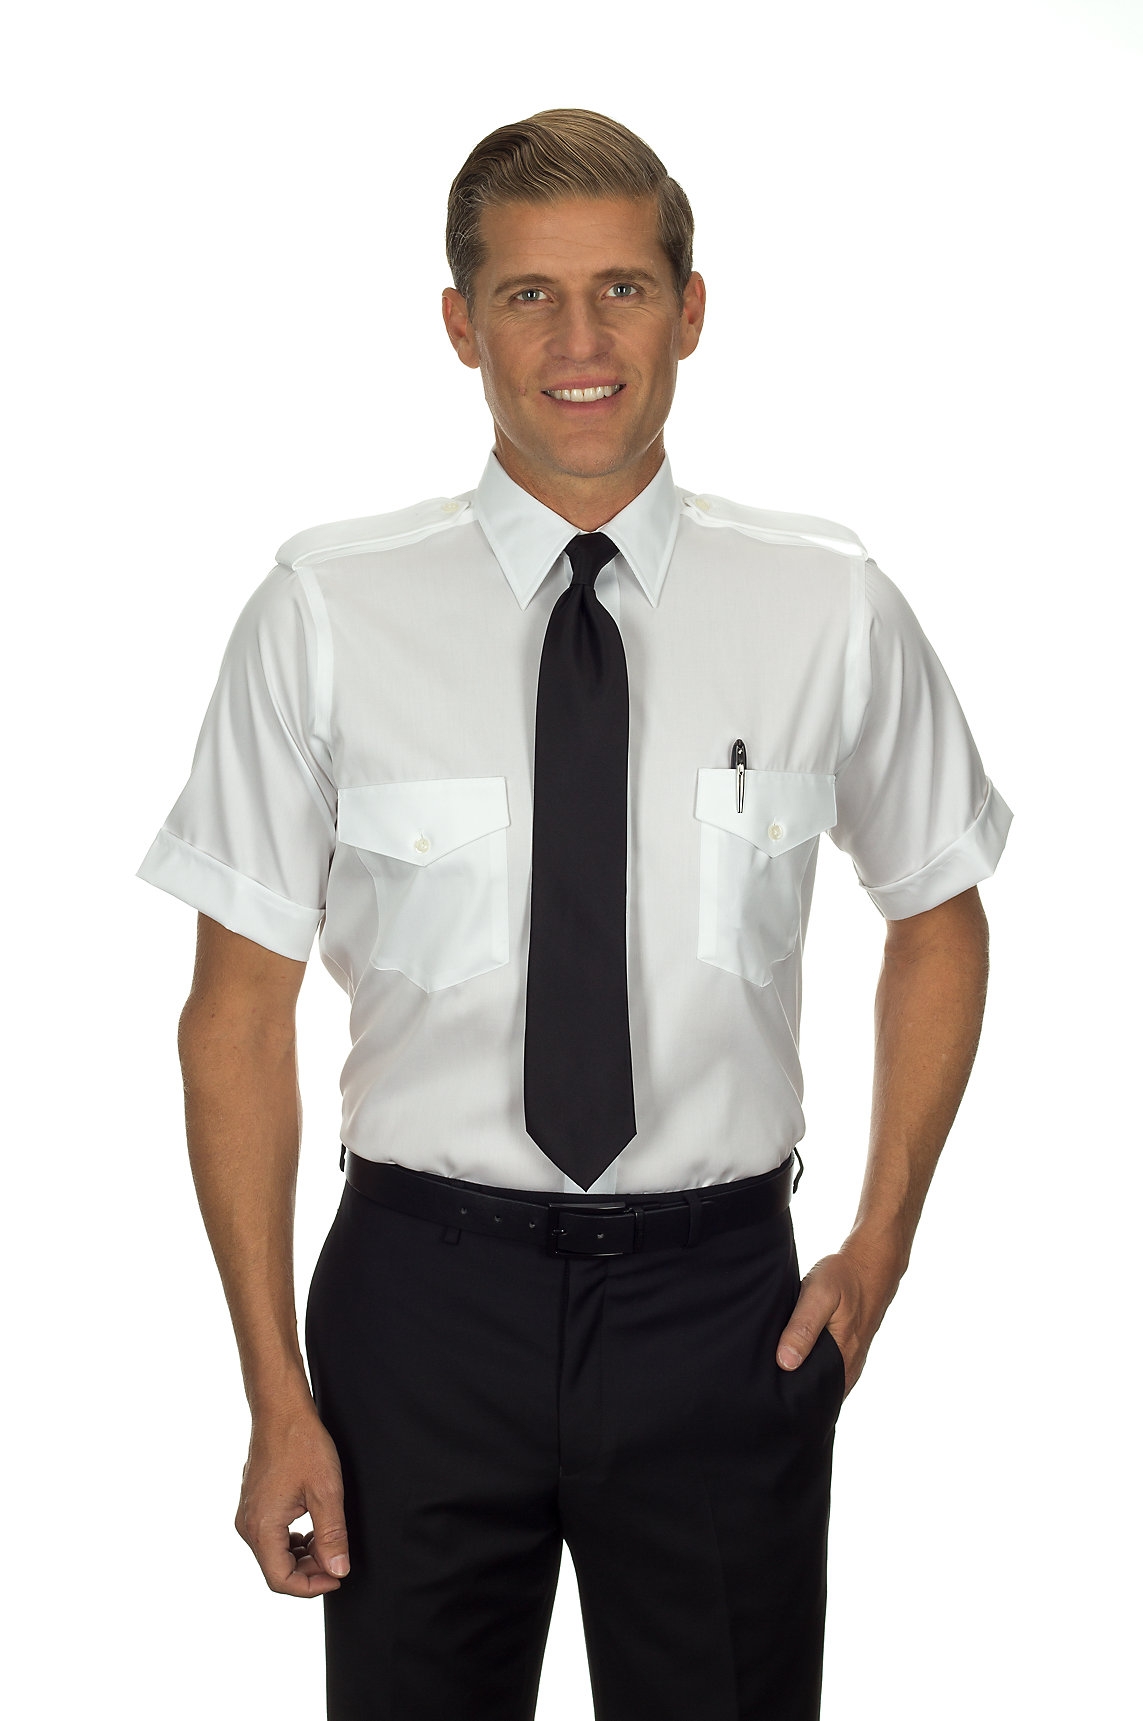 "THE AVIATOR ALL COTTON NON-IRON" NEW from Vanheusen - Regular Fit, Short Sleeve, White Only-242